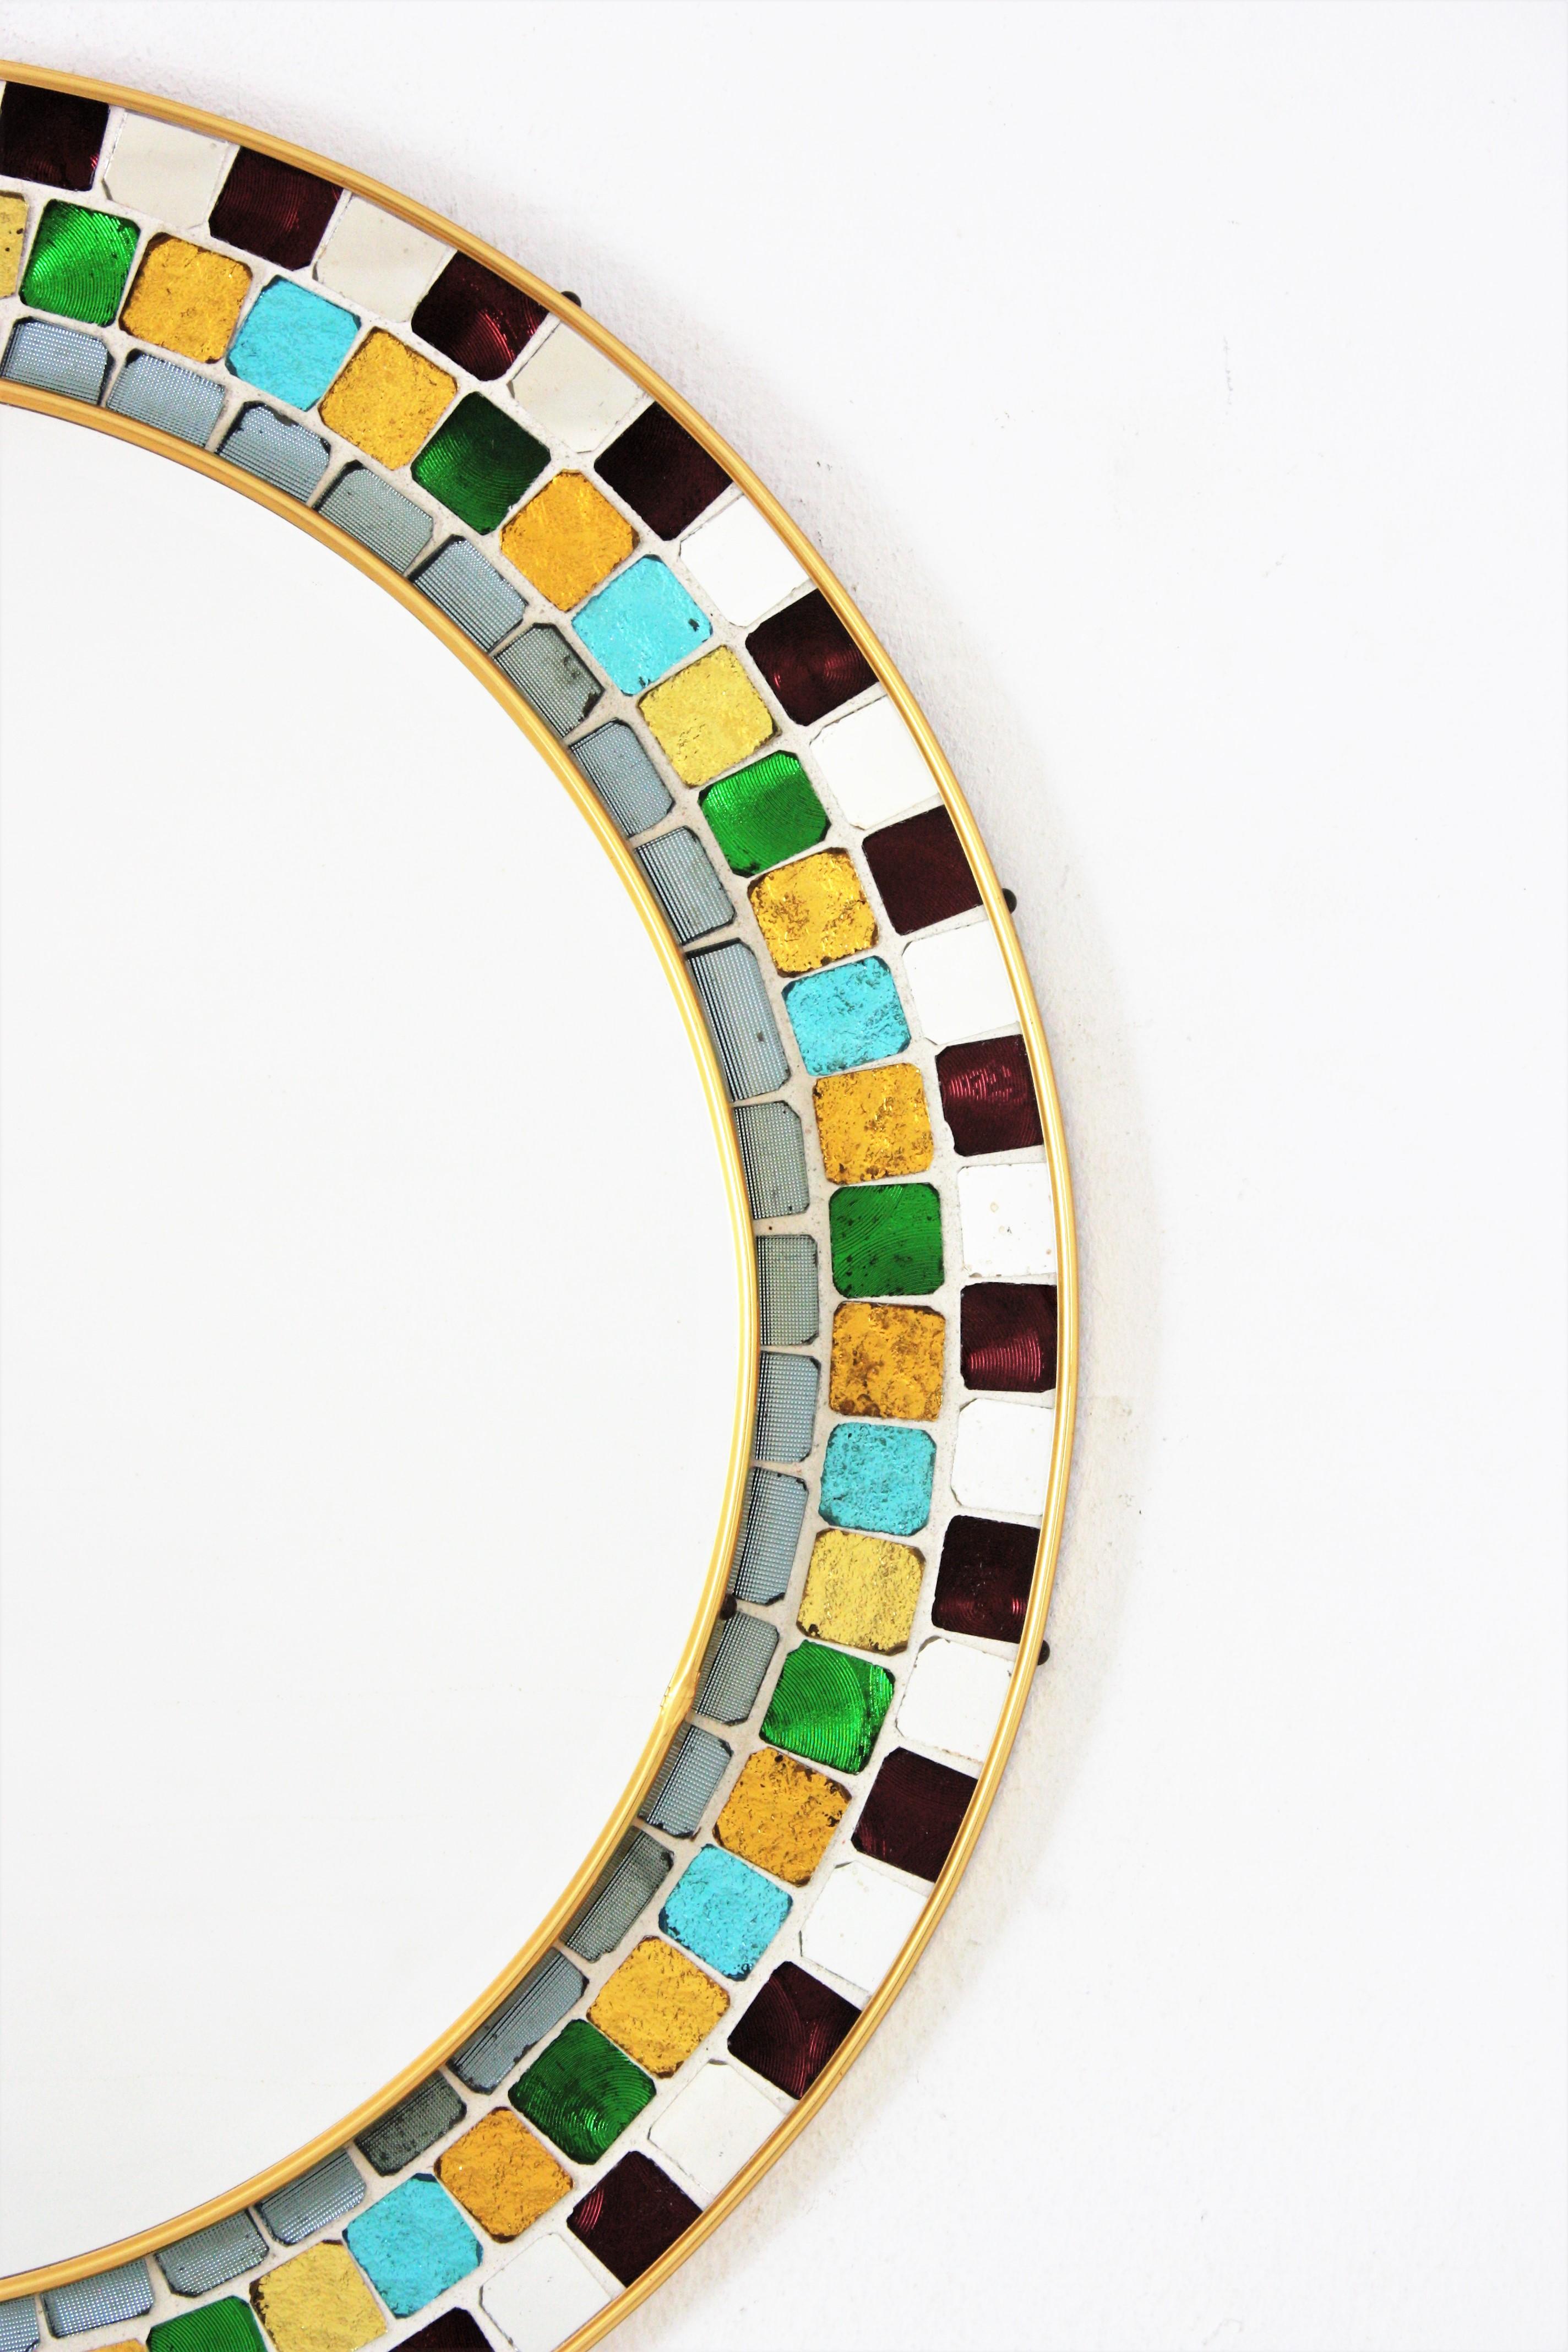 20th Century Midcentury Round Mirror with Multi Color Glass Mosaic Frame  For Sale